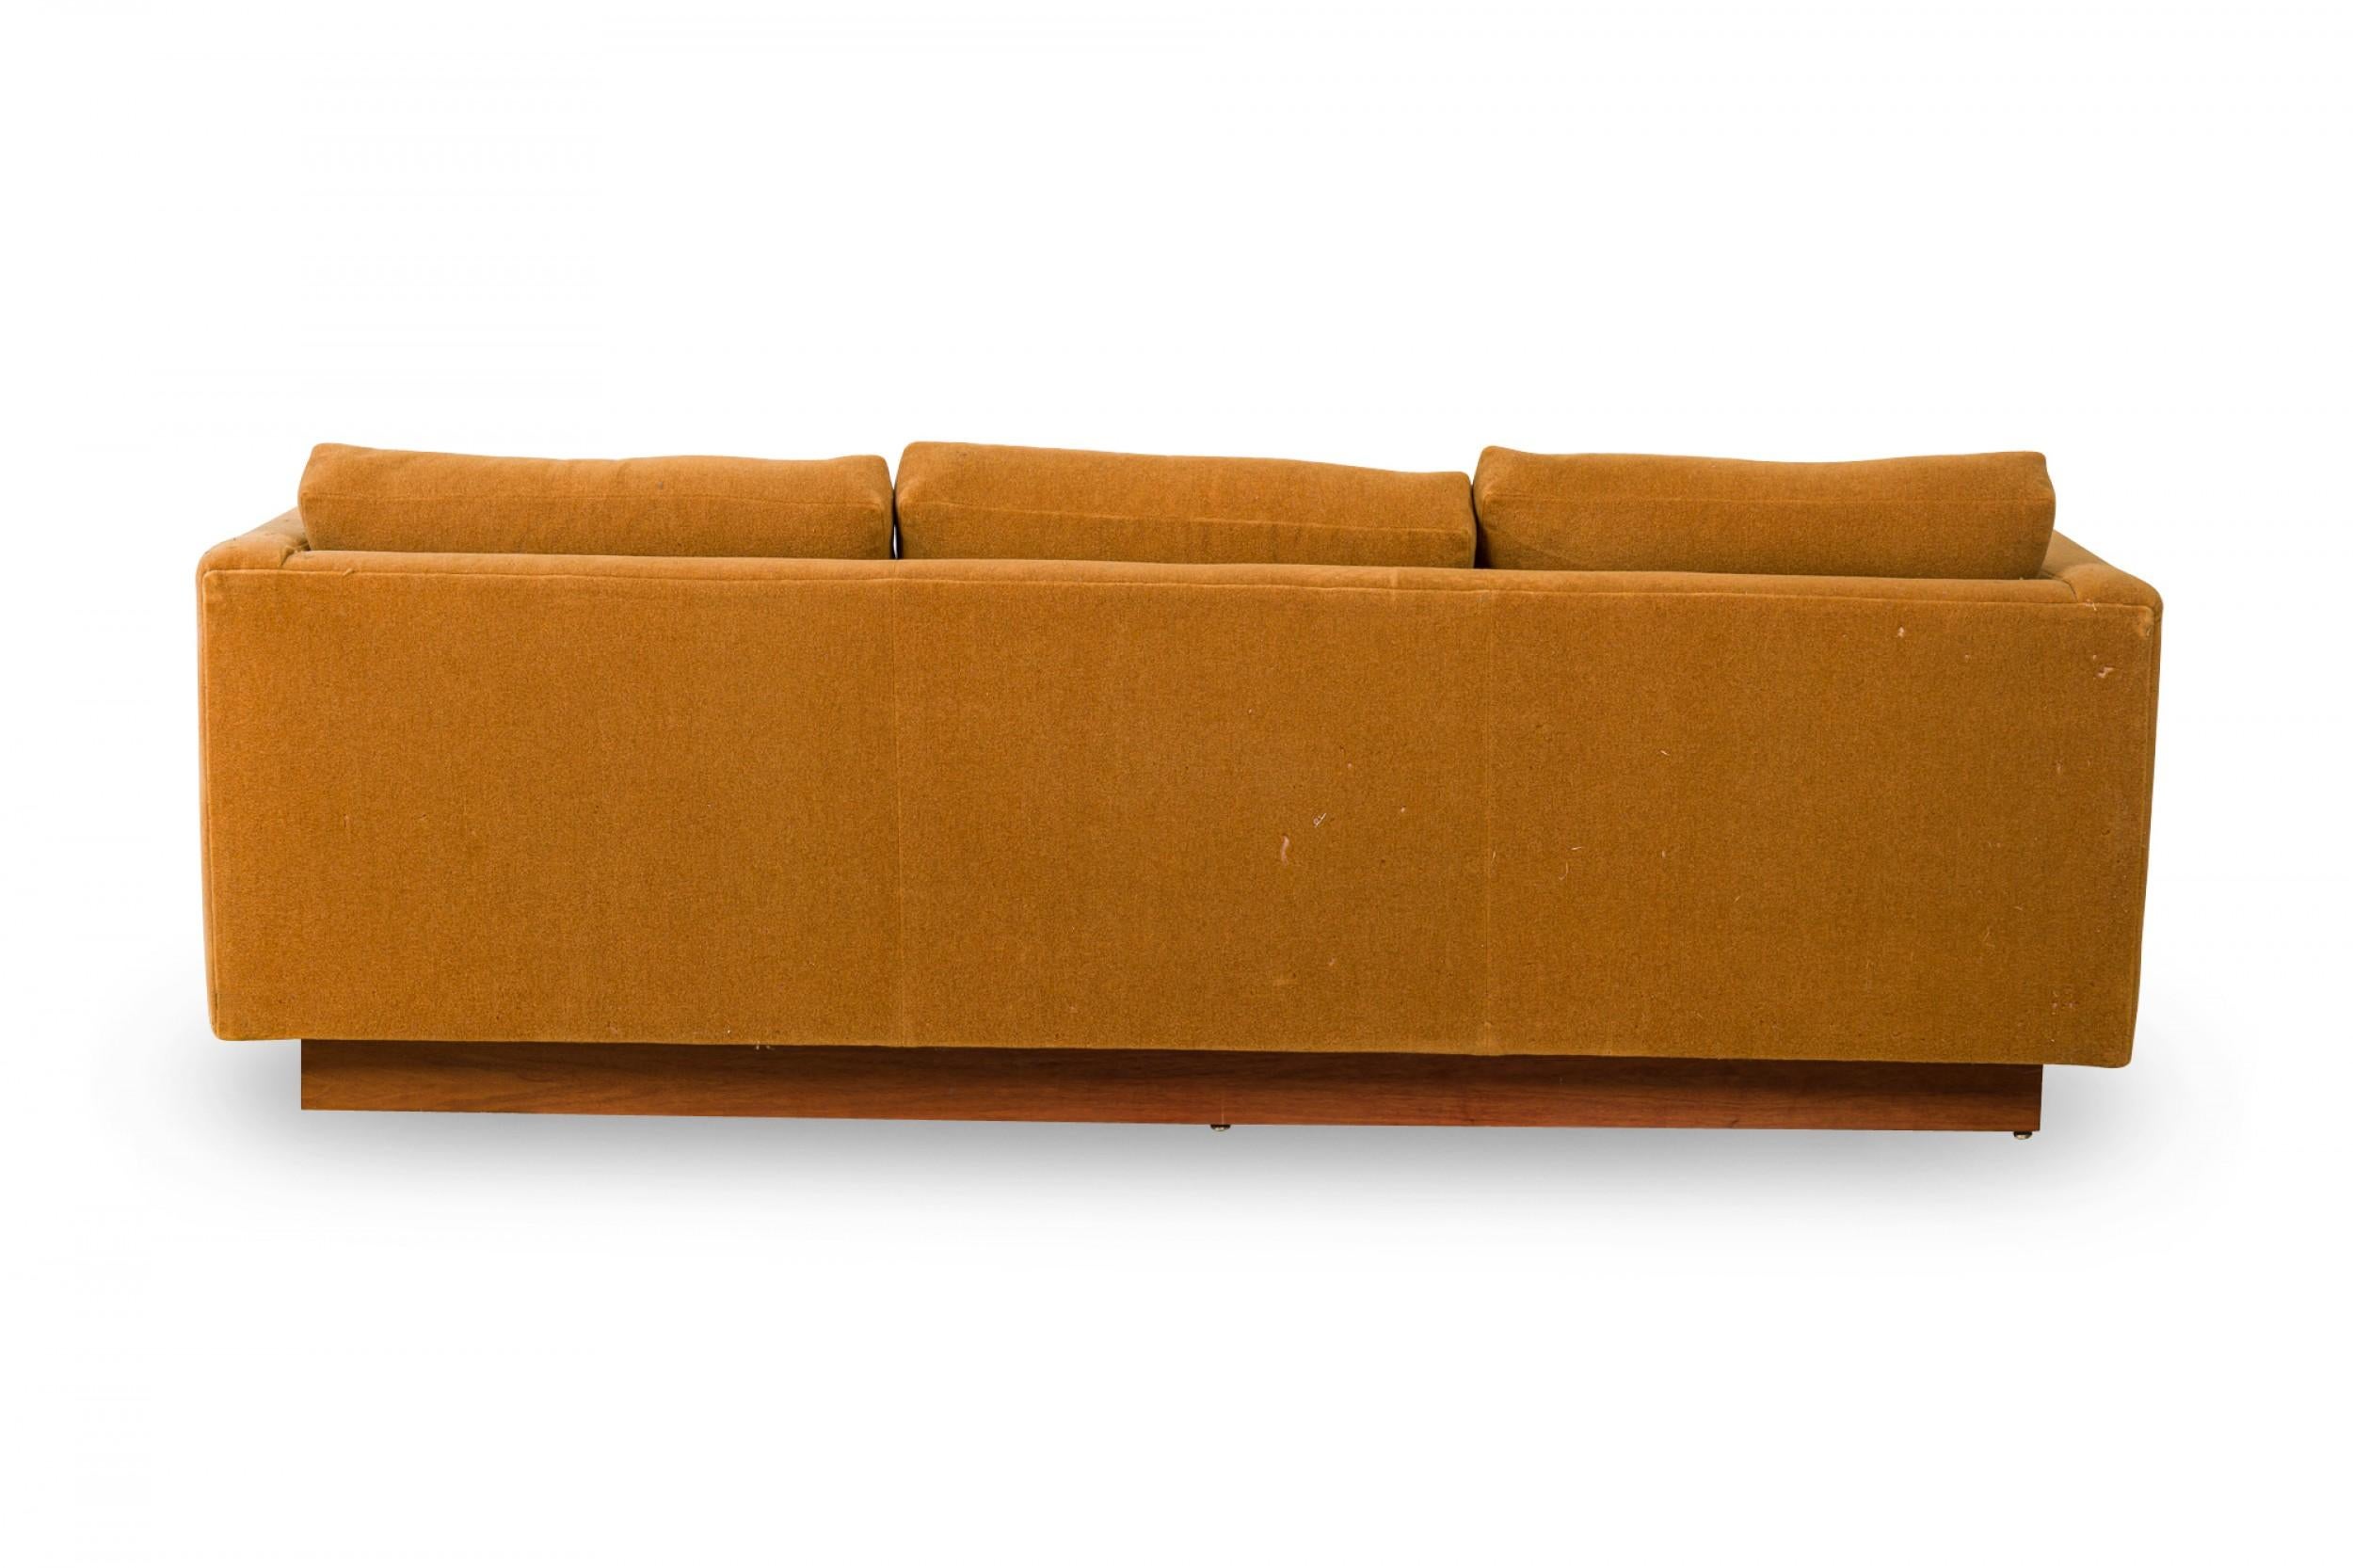 Milo Baughman Gold Fabric Upholstered Floating 'Tuxedo' Sofa In Good Condition For Sale In New York, NY